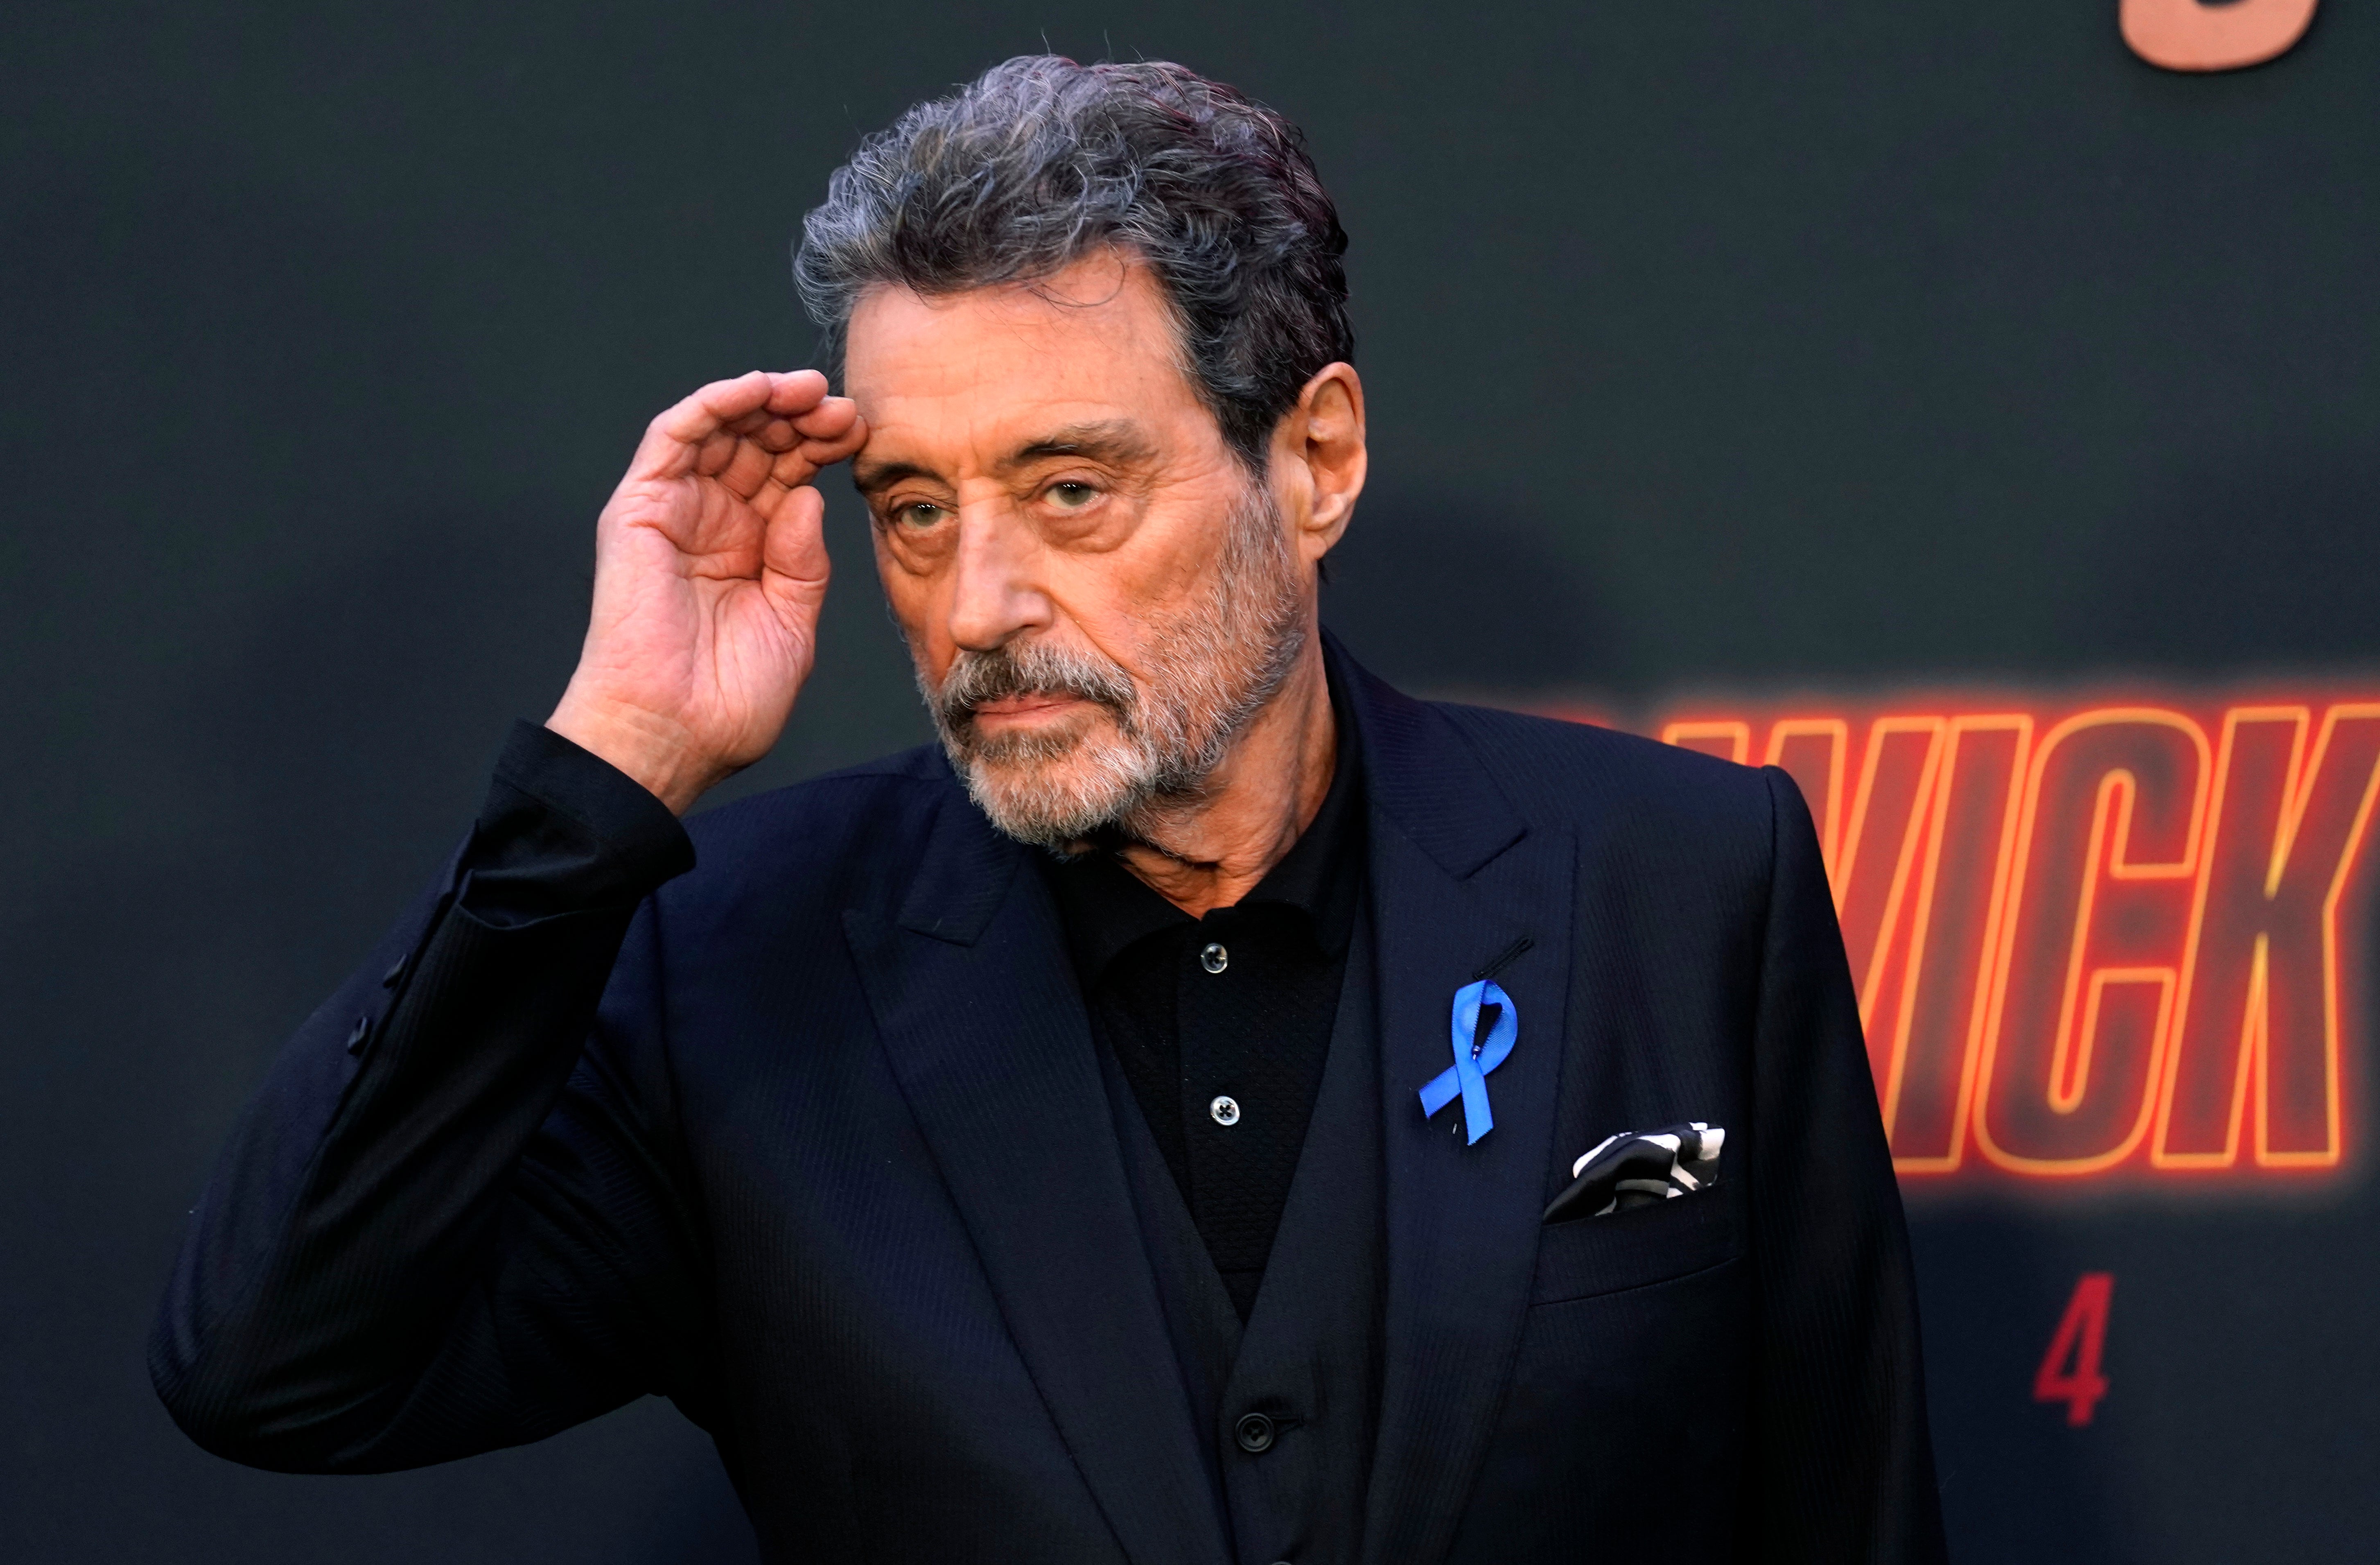 Ian McShane at the LA Premiere of ‘John Wick: Chapter 4’ in 2023